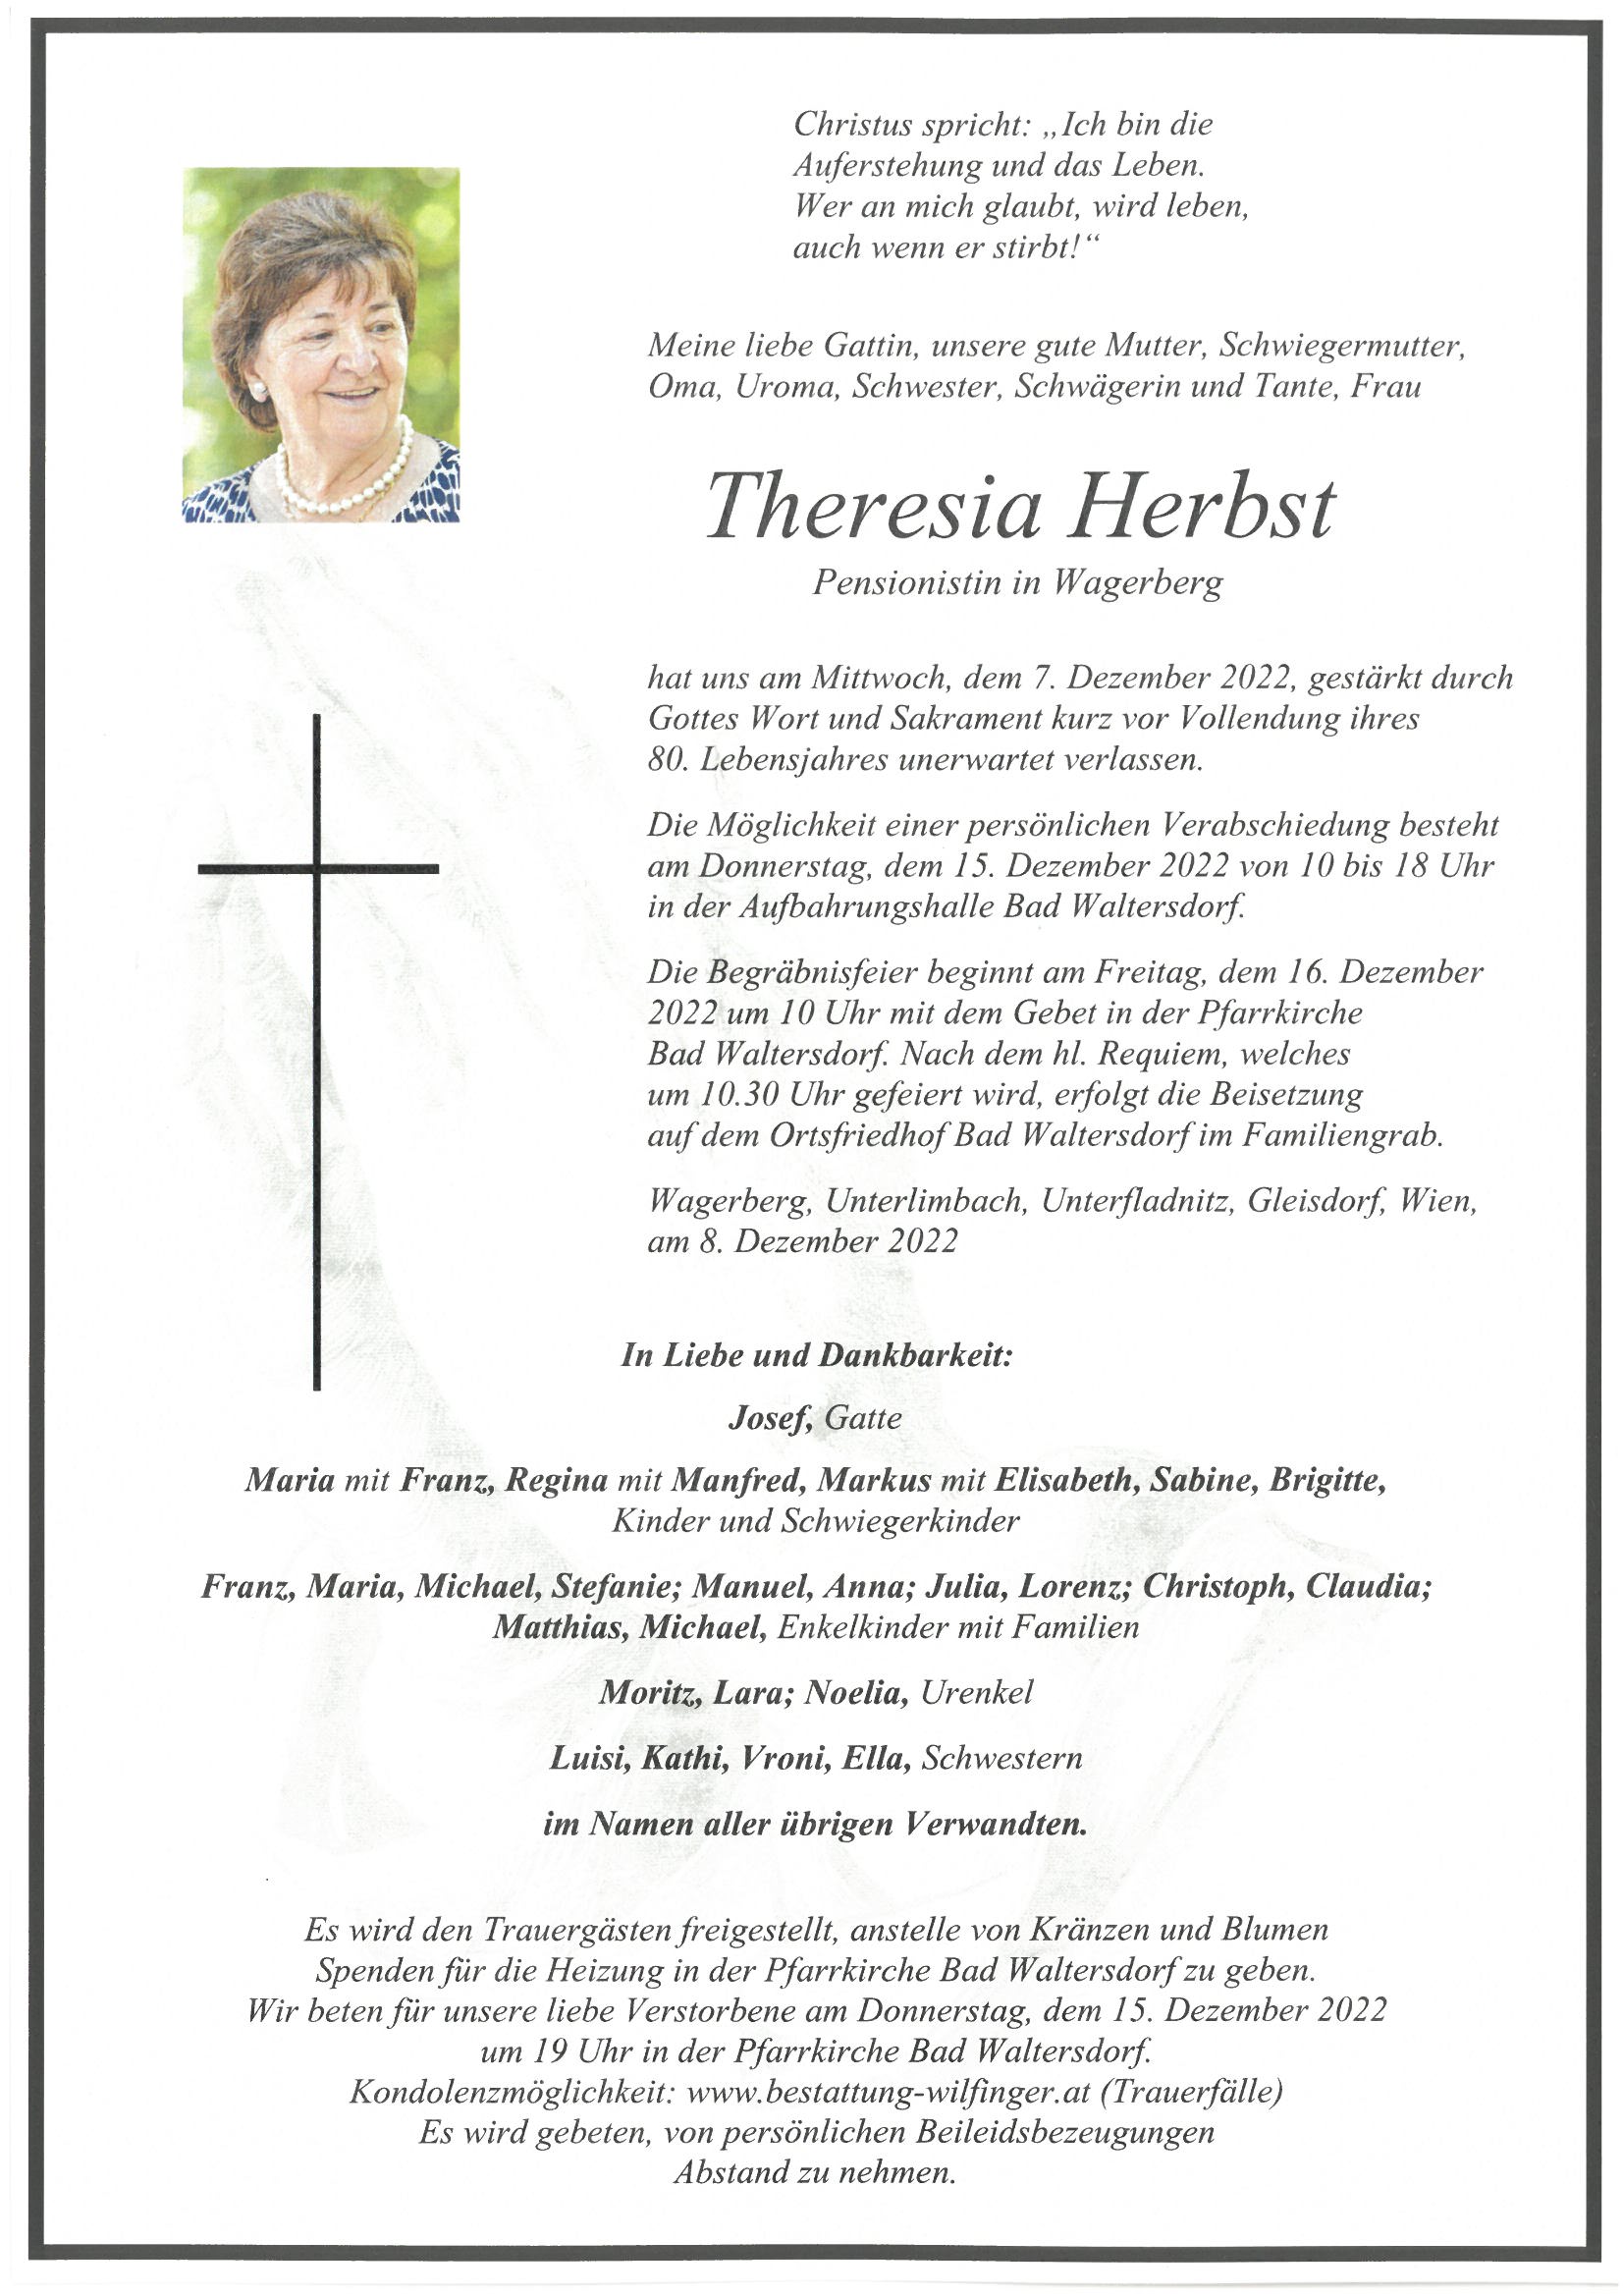 Theresia Herbst, Wagerberg